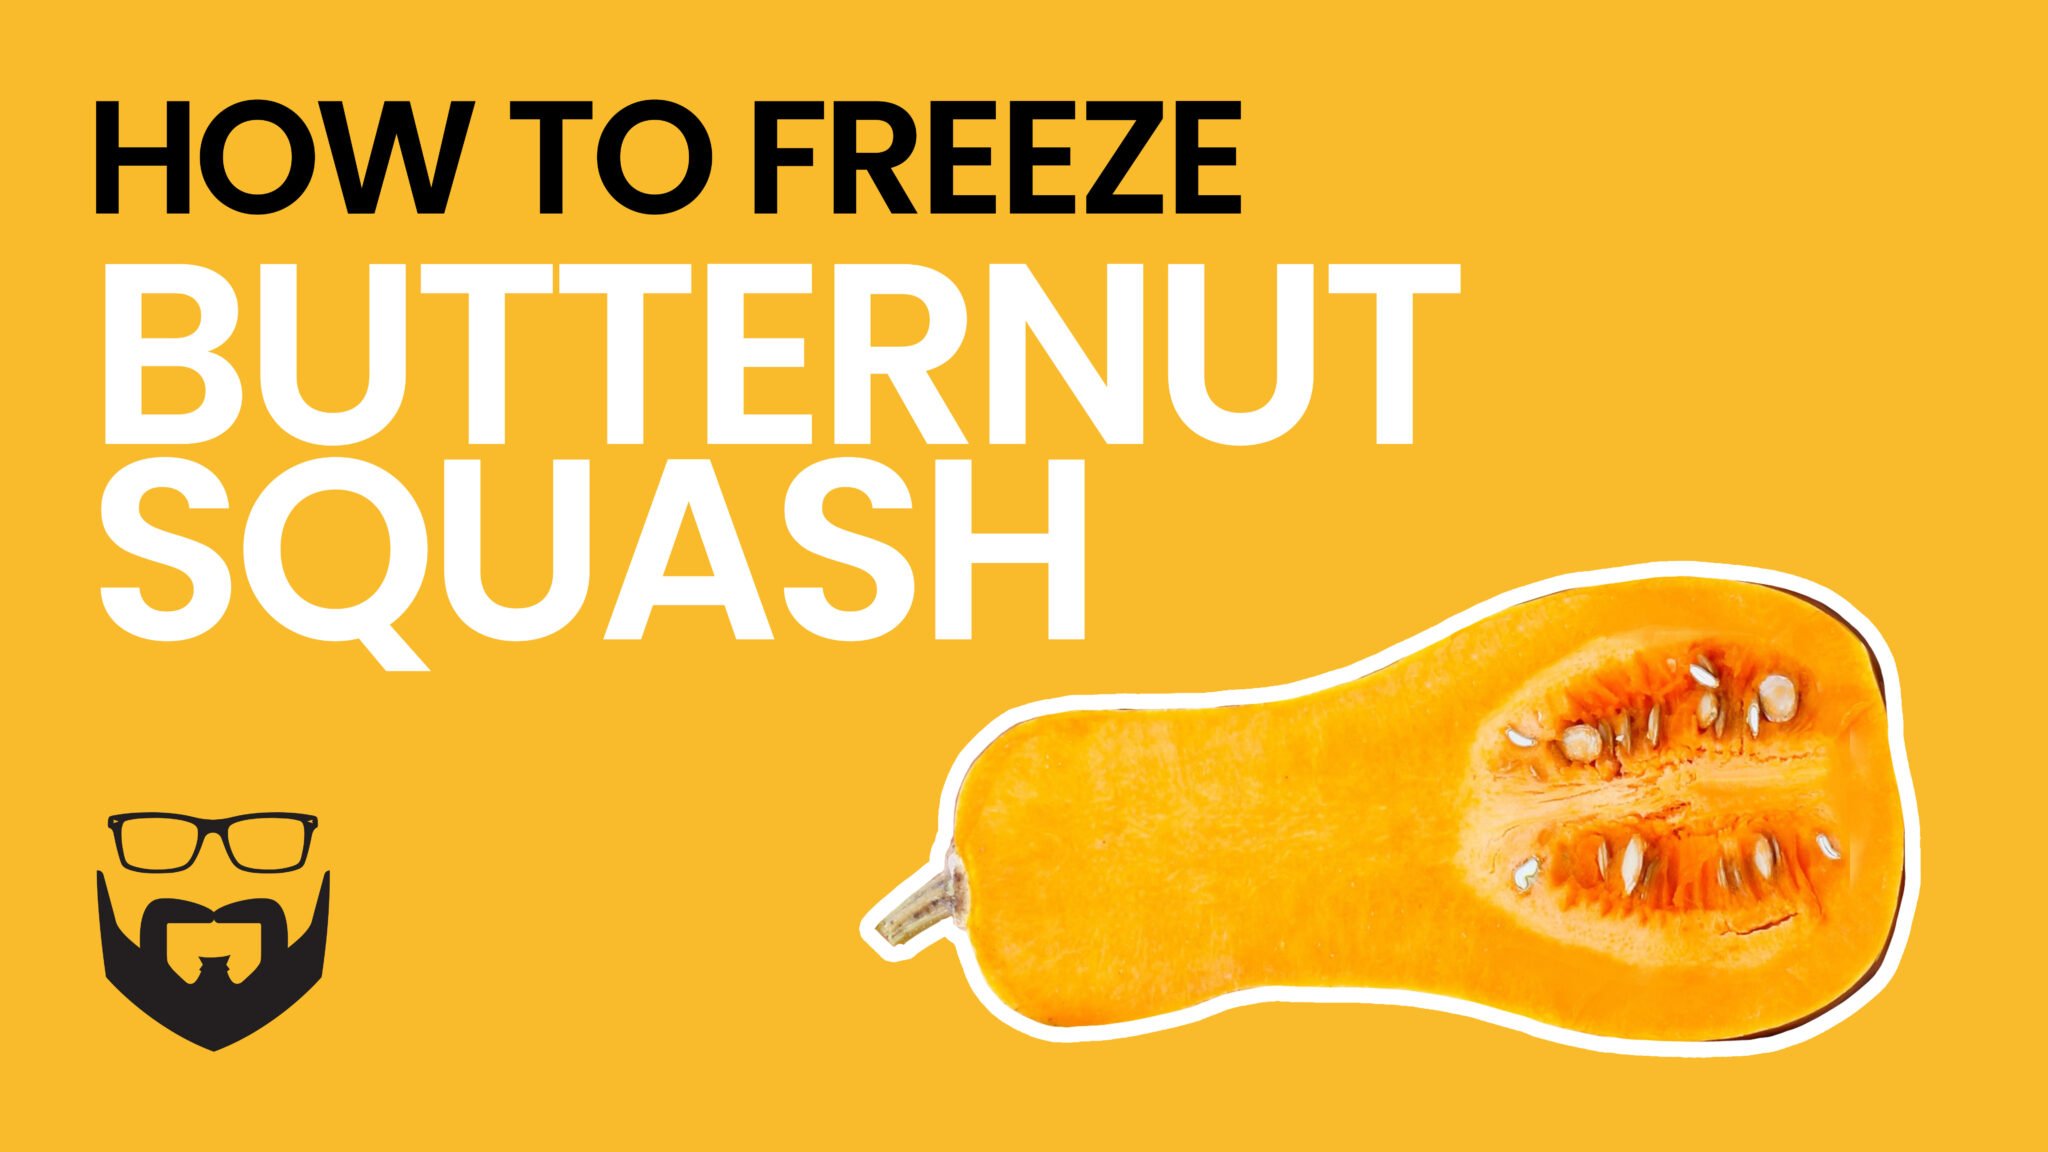 How to Freeze Butternut Squash Video - Yellow